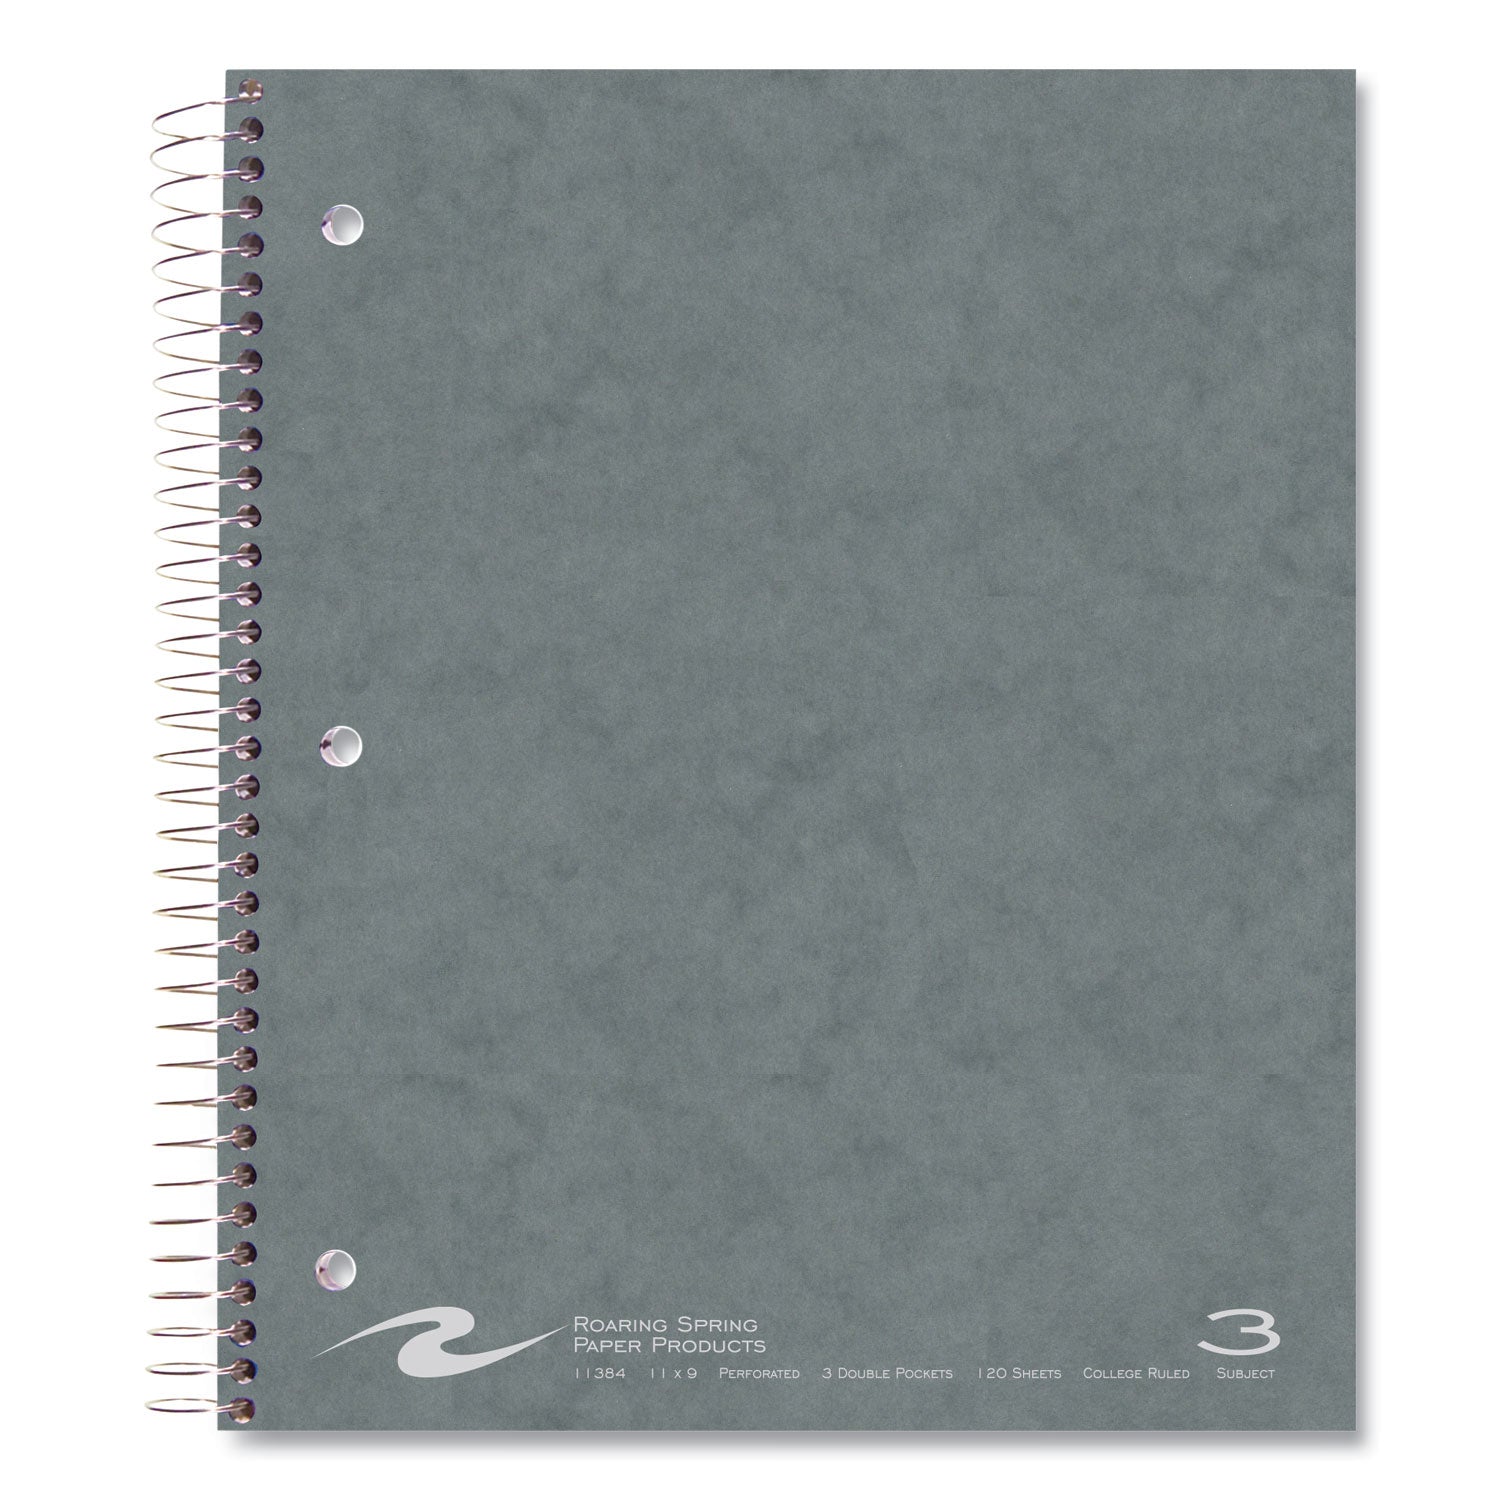 subject-wirebound-notebook-3-subject-medium-college-rule-asst-cover-120-11-x-9-sheets-24-carton-ships-in-4-6-bus-days_roa11384cs - 2